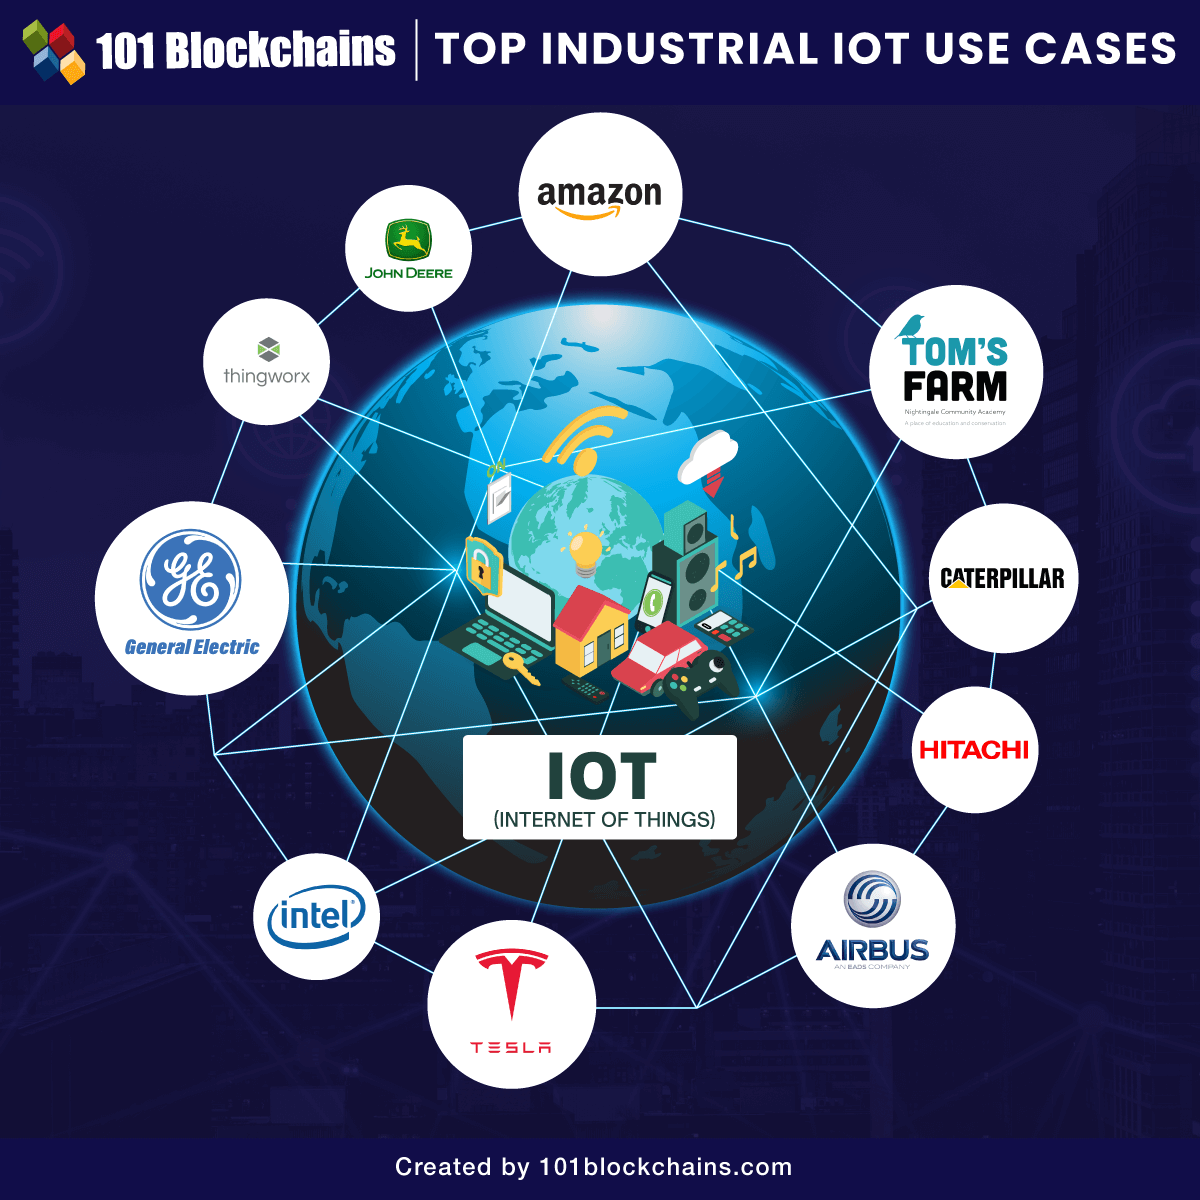 Top Industrial IoT Use Cases